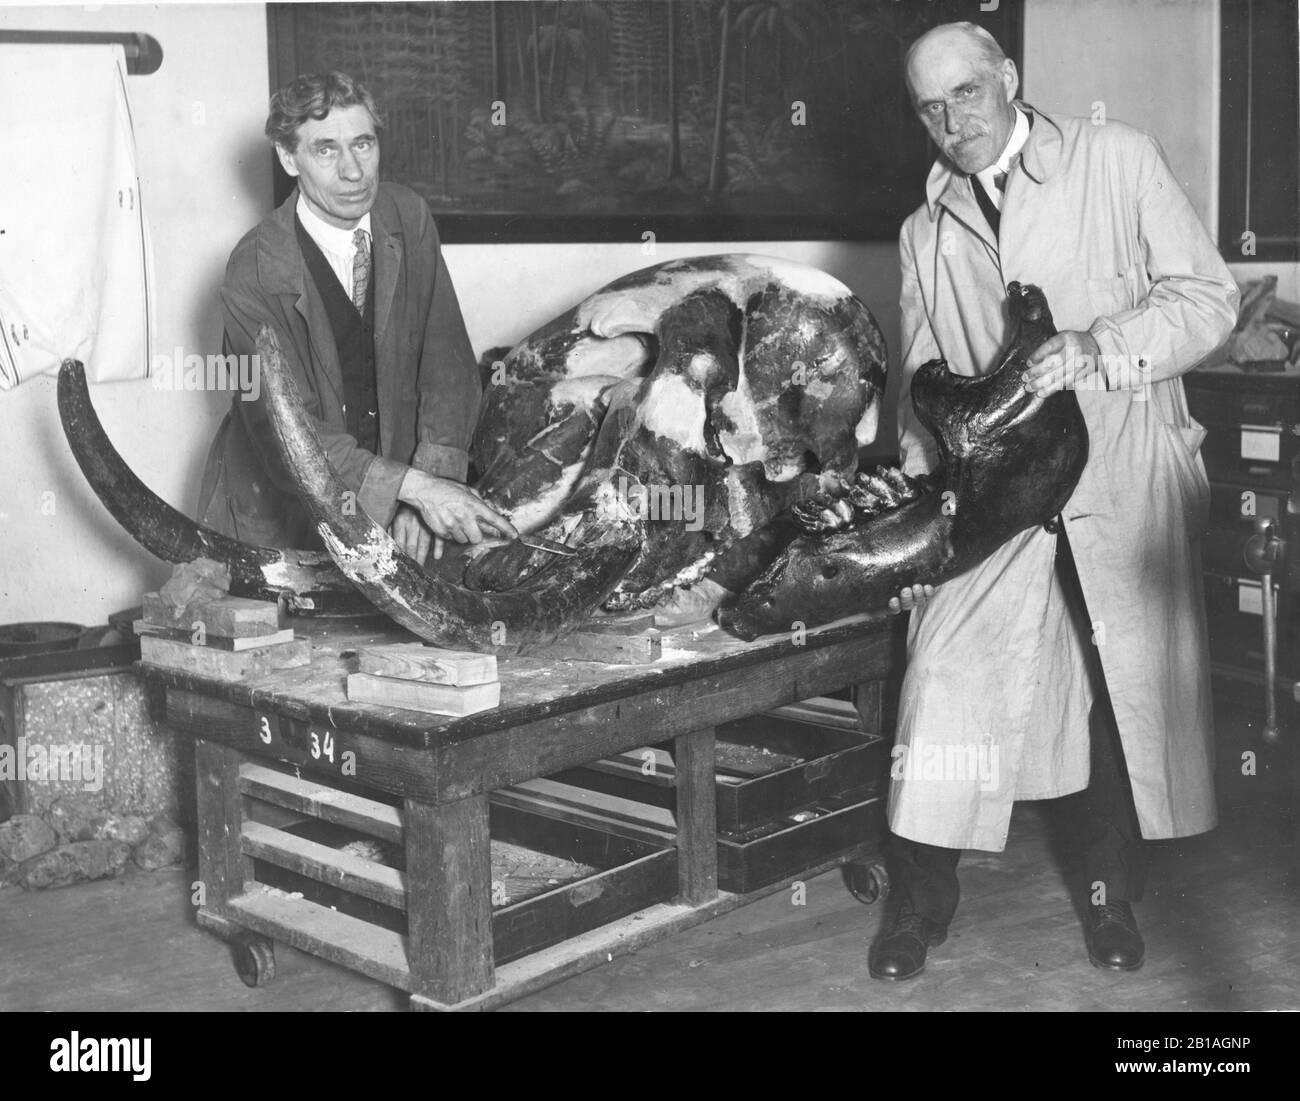 Palaentologist and geologist Dr. Oliver C(ummings) Farrington, right, (1864-1933) and Professor Abbot, of the Chicago (Illinois) Field Museum of Natural History, examine the skull of a young Mastodon that had roamed the jungles of Indiana 20,000 years ago. Dr. Farrington wrote extensively about his specialties. To see my related vintage images, Search:  Prestor  vintage  writer Stock Photo